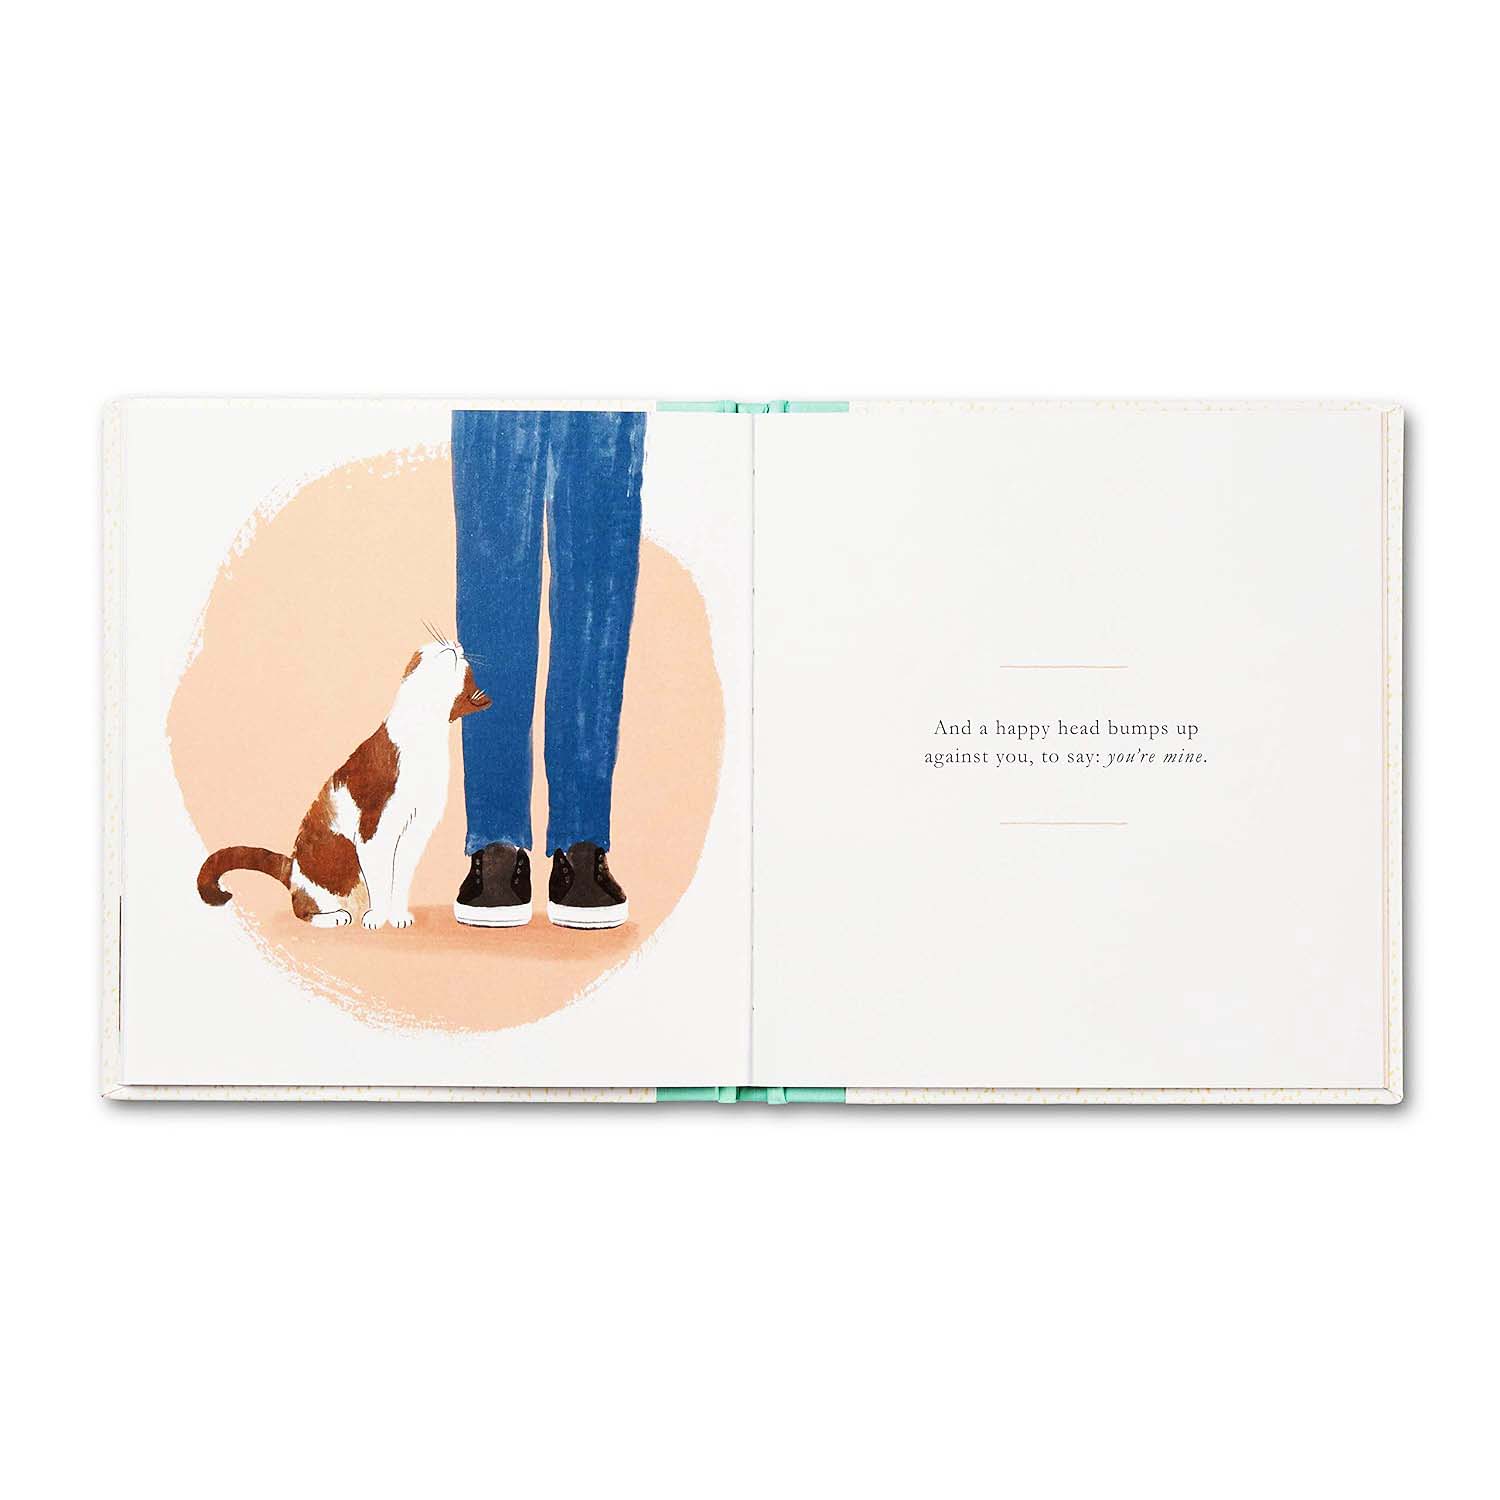 middle pages of the book "When You Love a Cat" showing the illustration of a cat and a person.